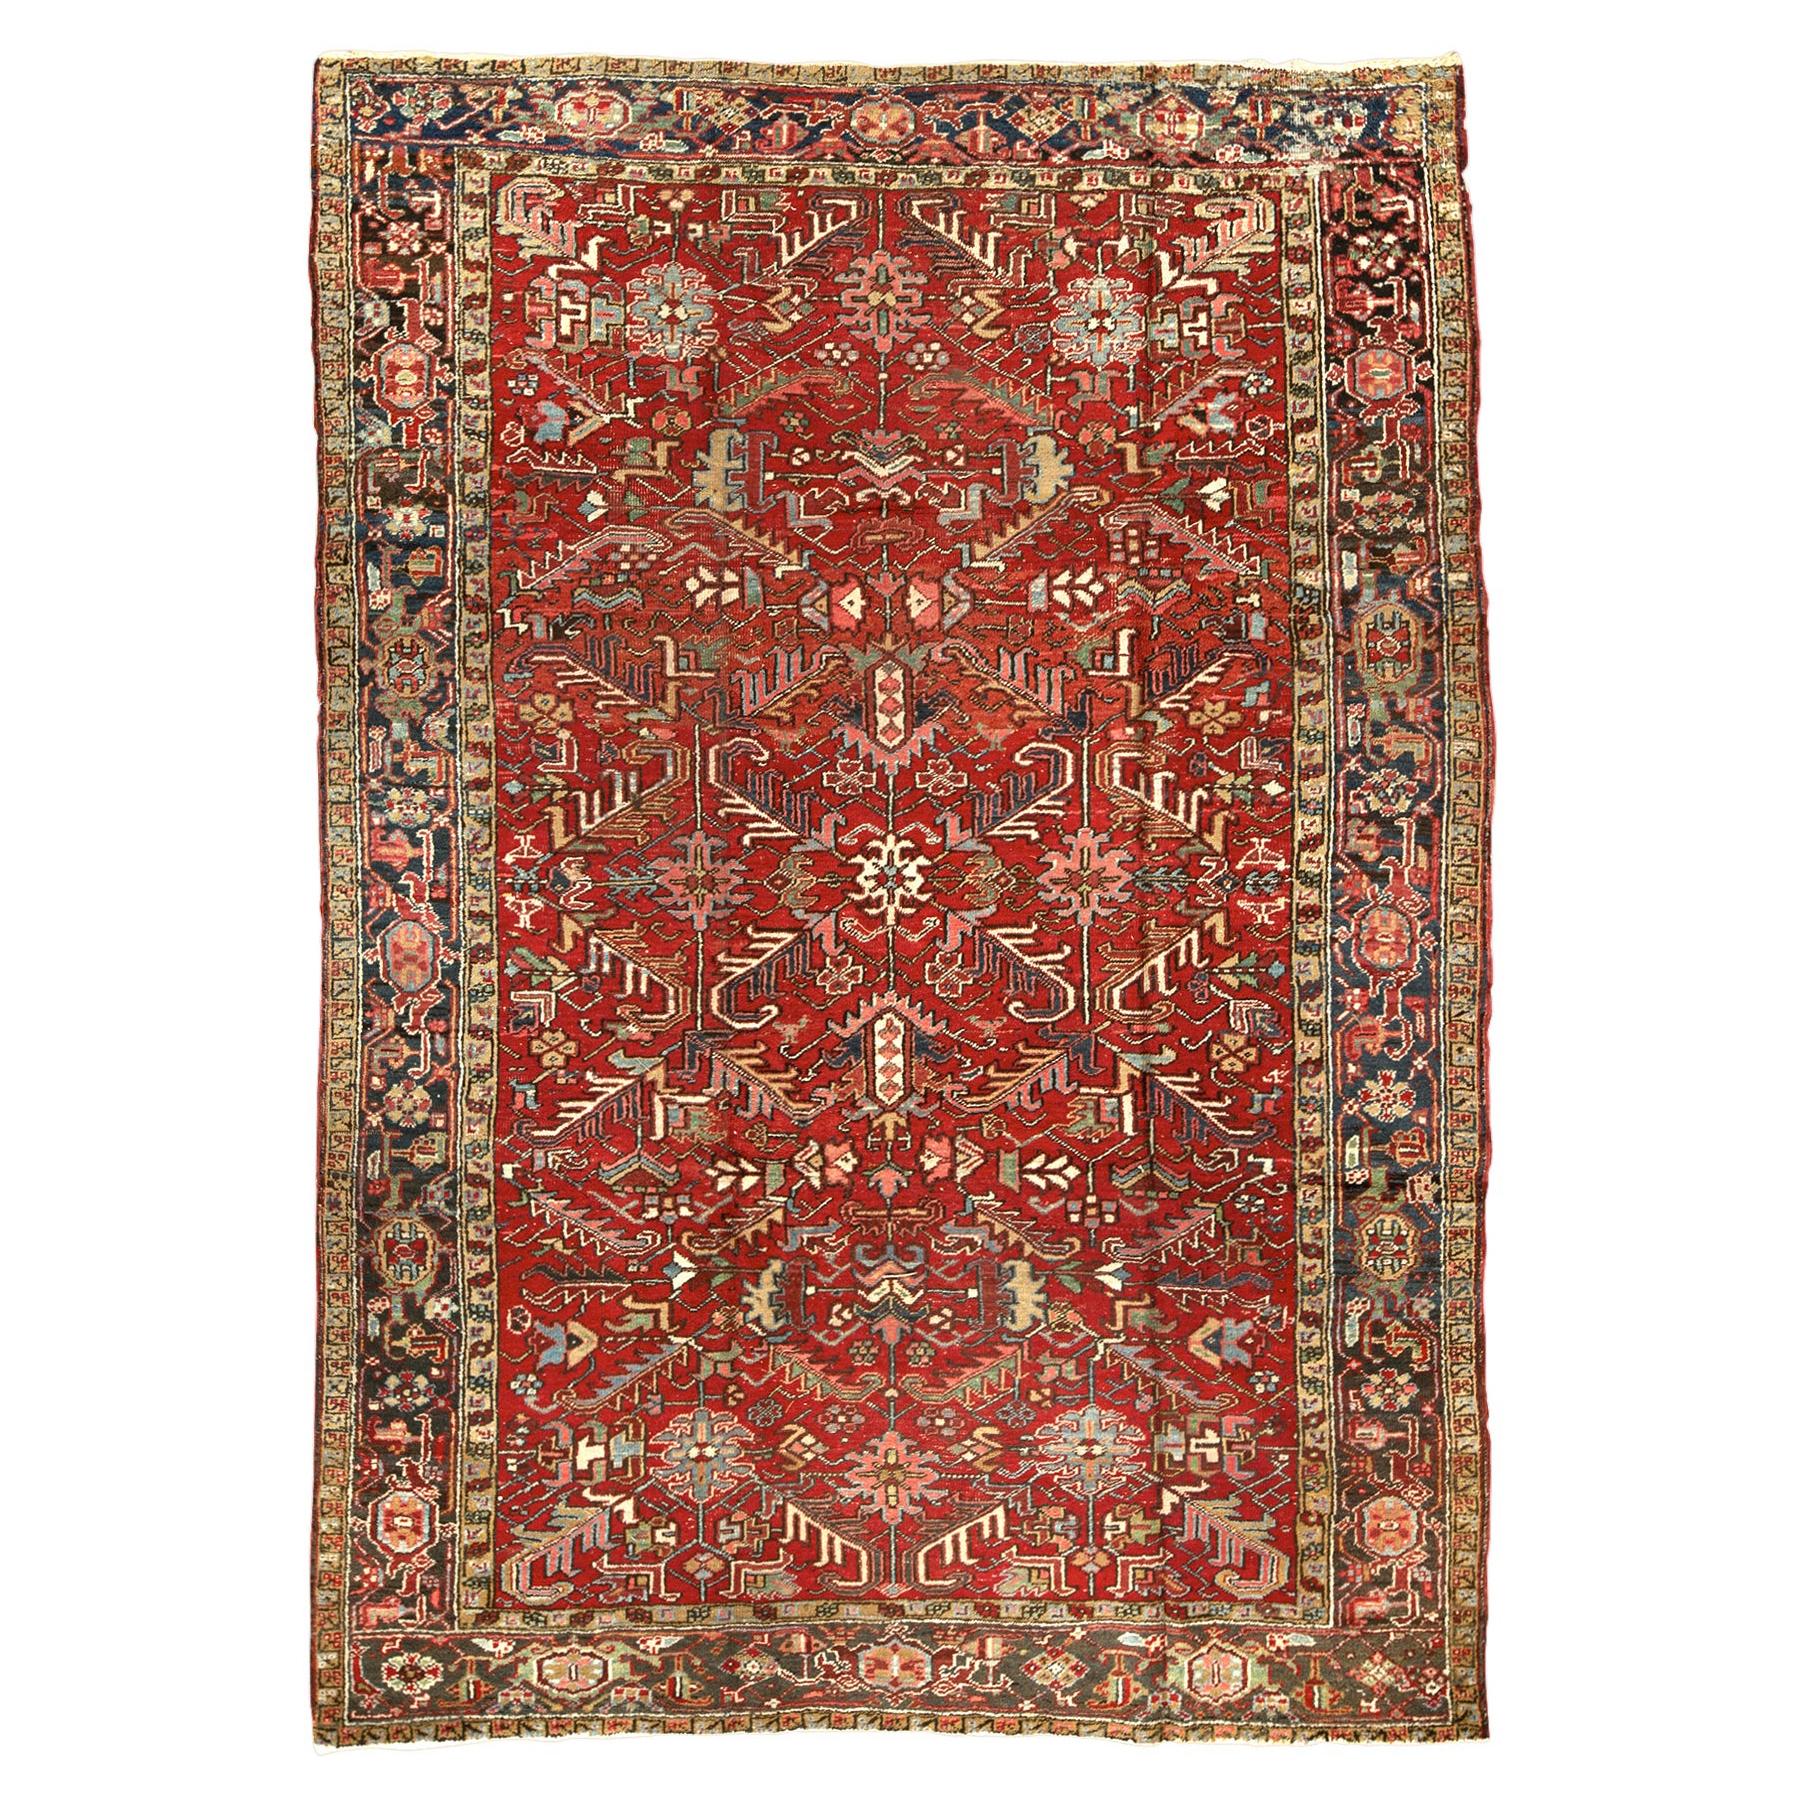  Antique Persian fine Traditional Handwoven Luxury Wool Red / Black Rug For Sale